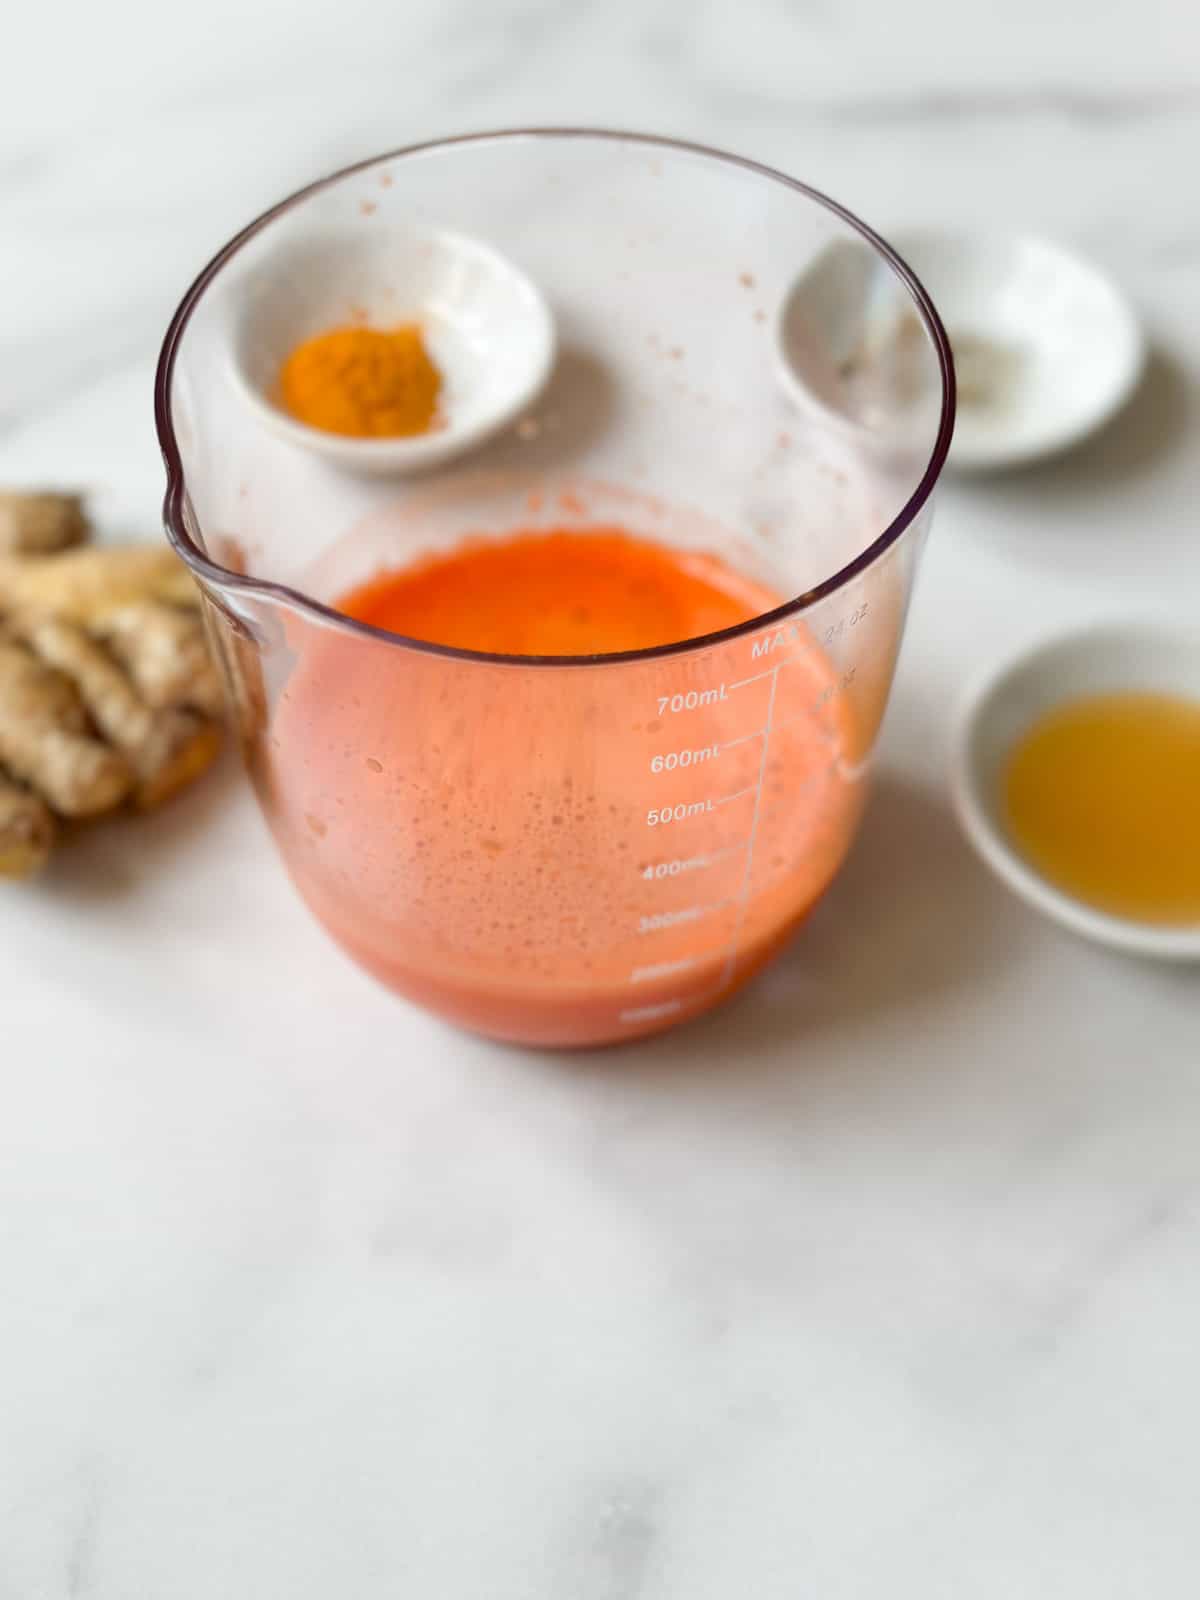 A juicer container of carrot juice next to ginger.